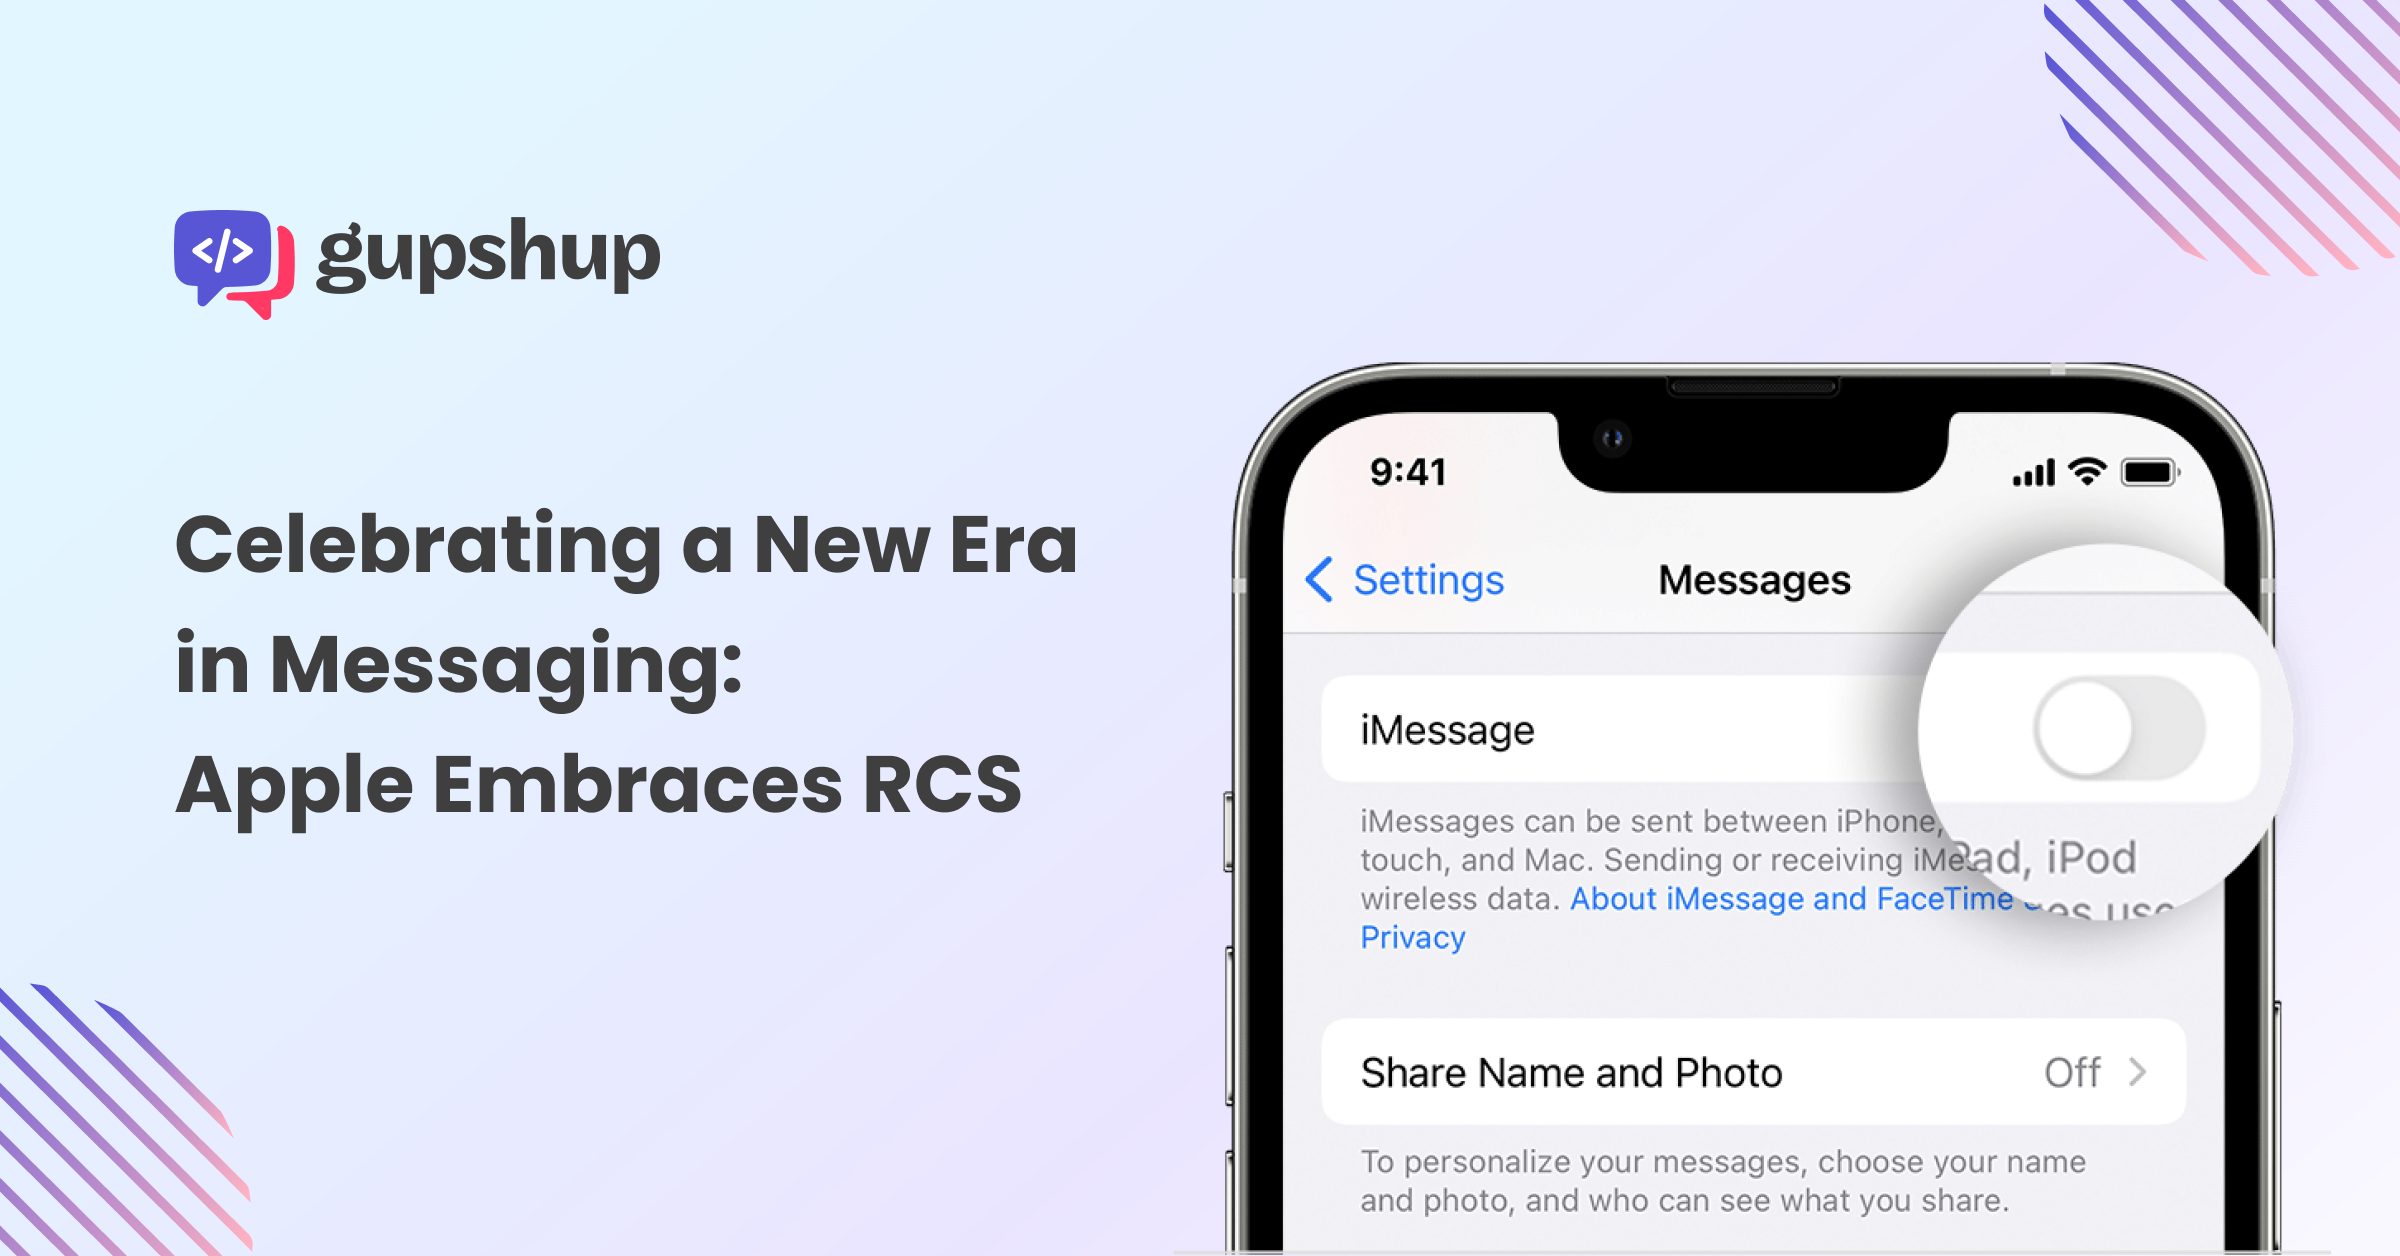 Apple Embraces RCS - A New Era in Messaging